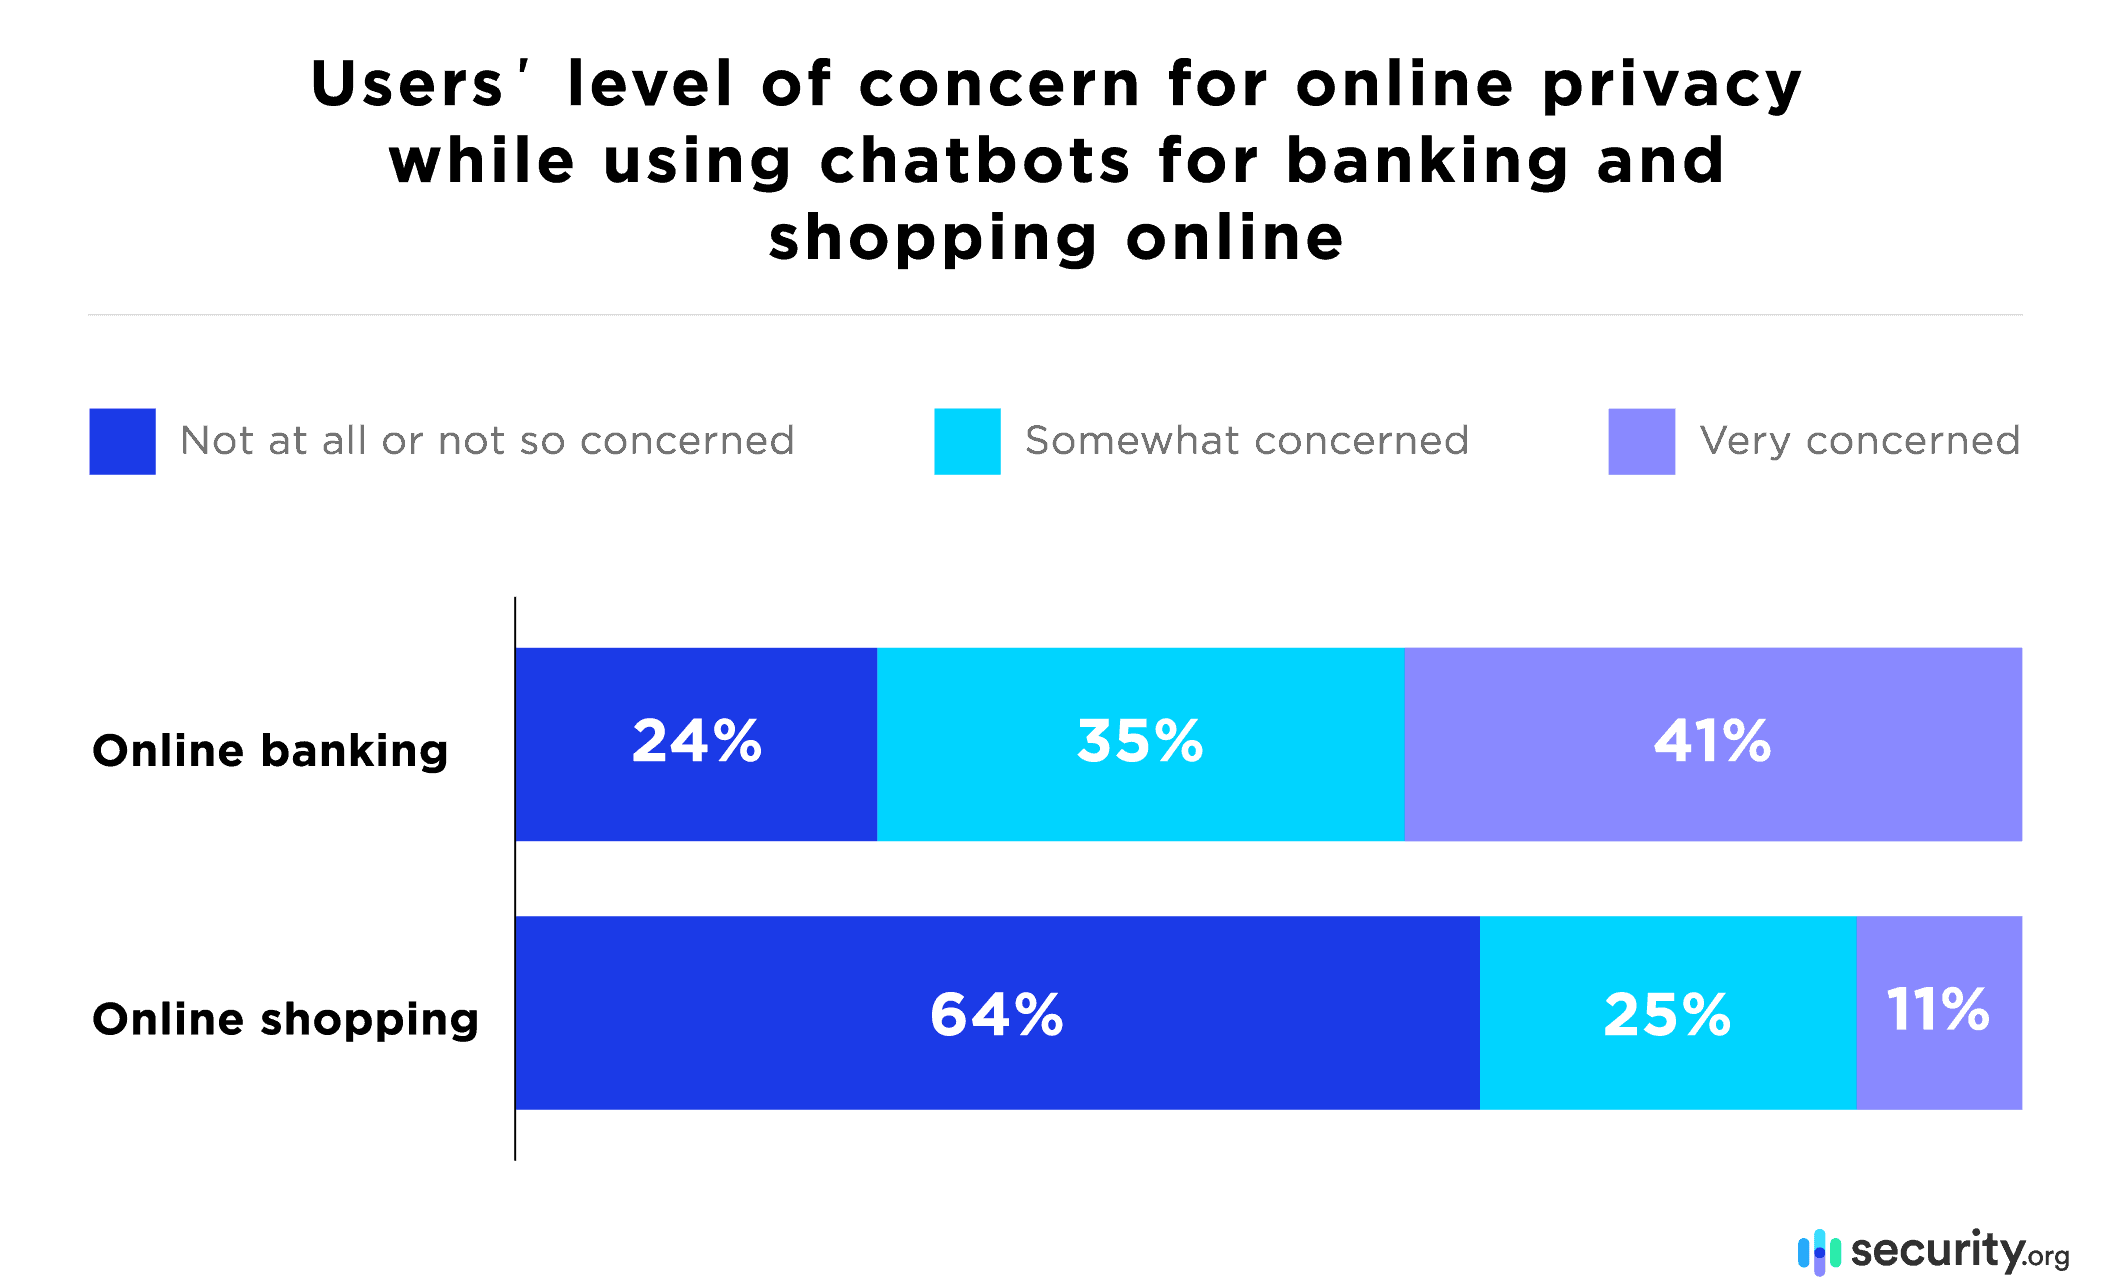 User level of concerns for online privacy while using chatbots for banking and shopping online